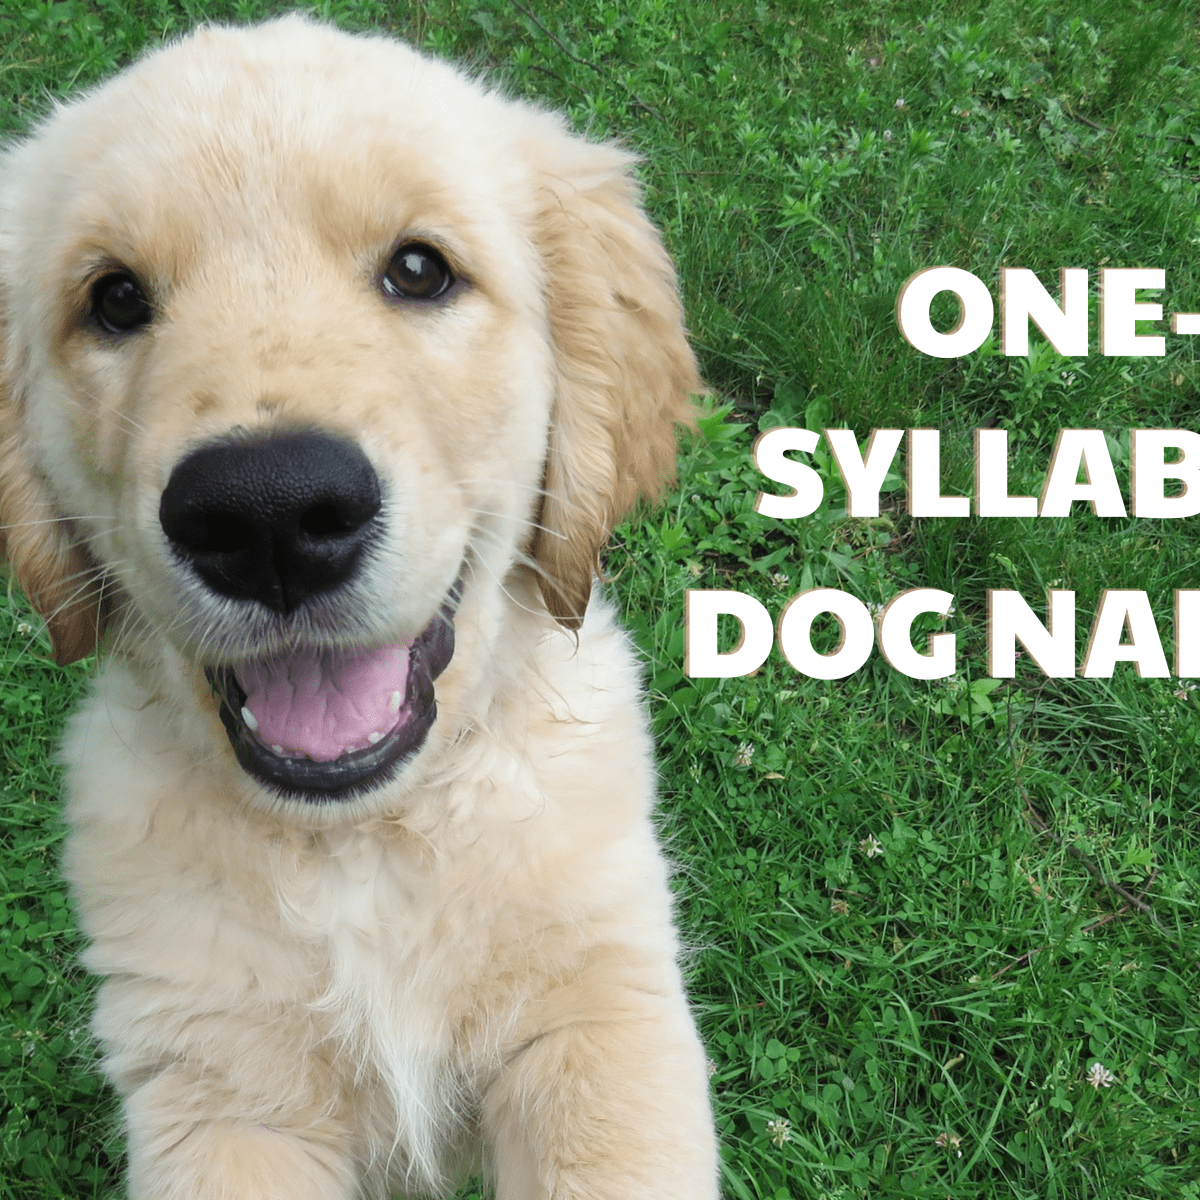 300+ Boat-Themed Dog Names - Something Wagging This Way Comes